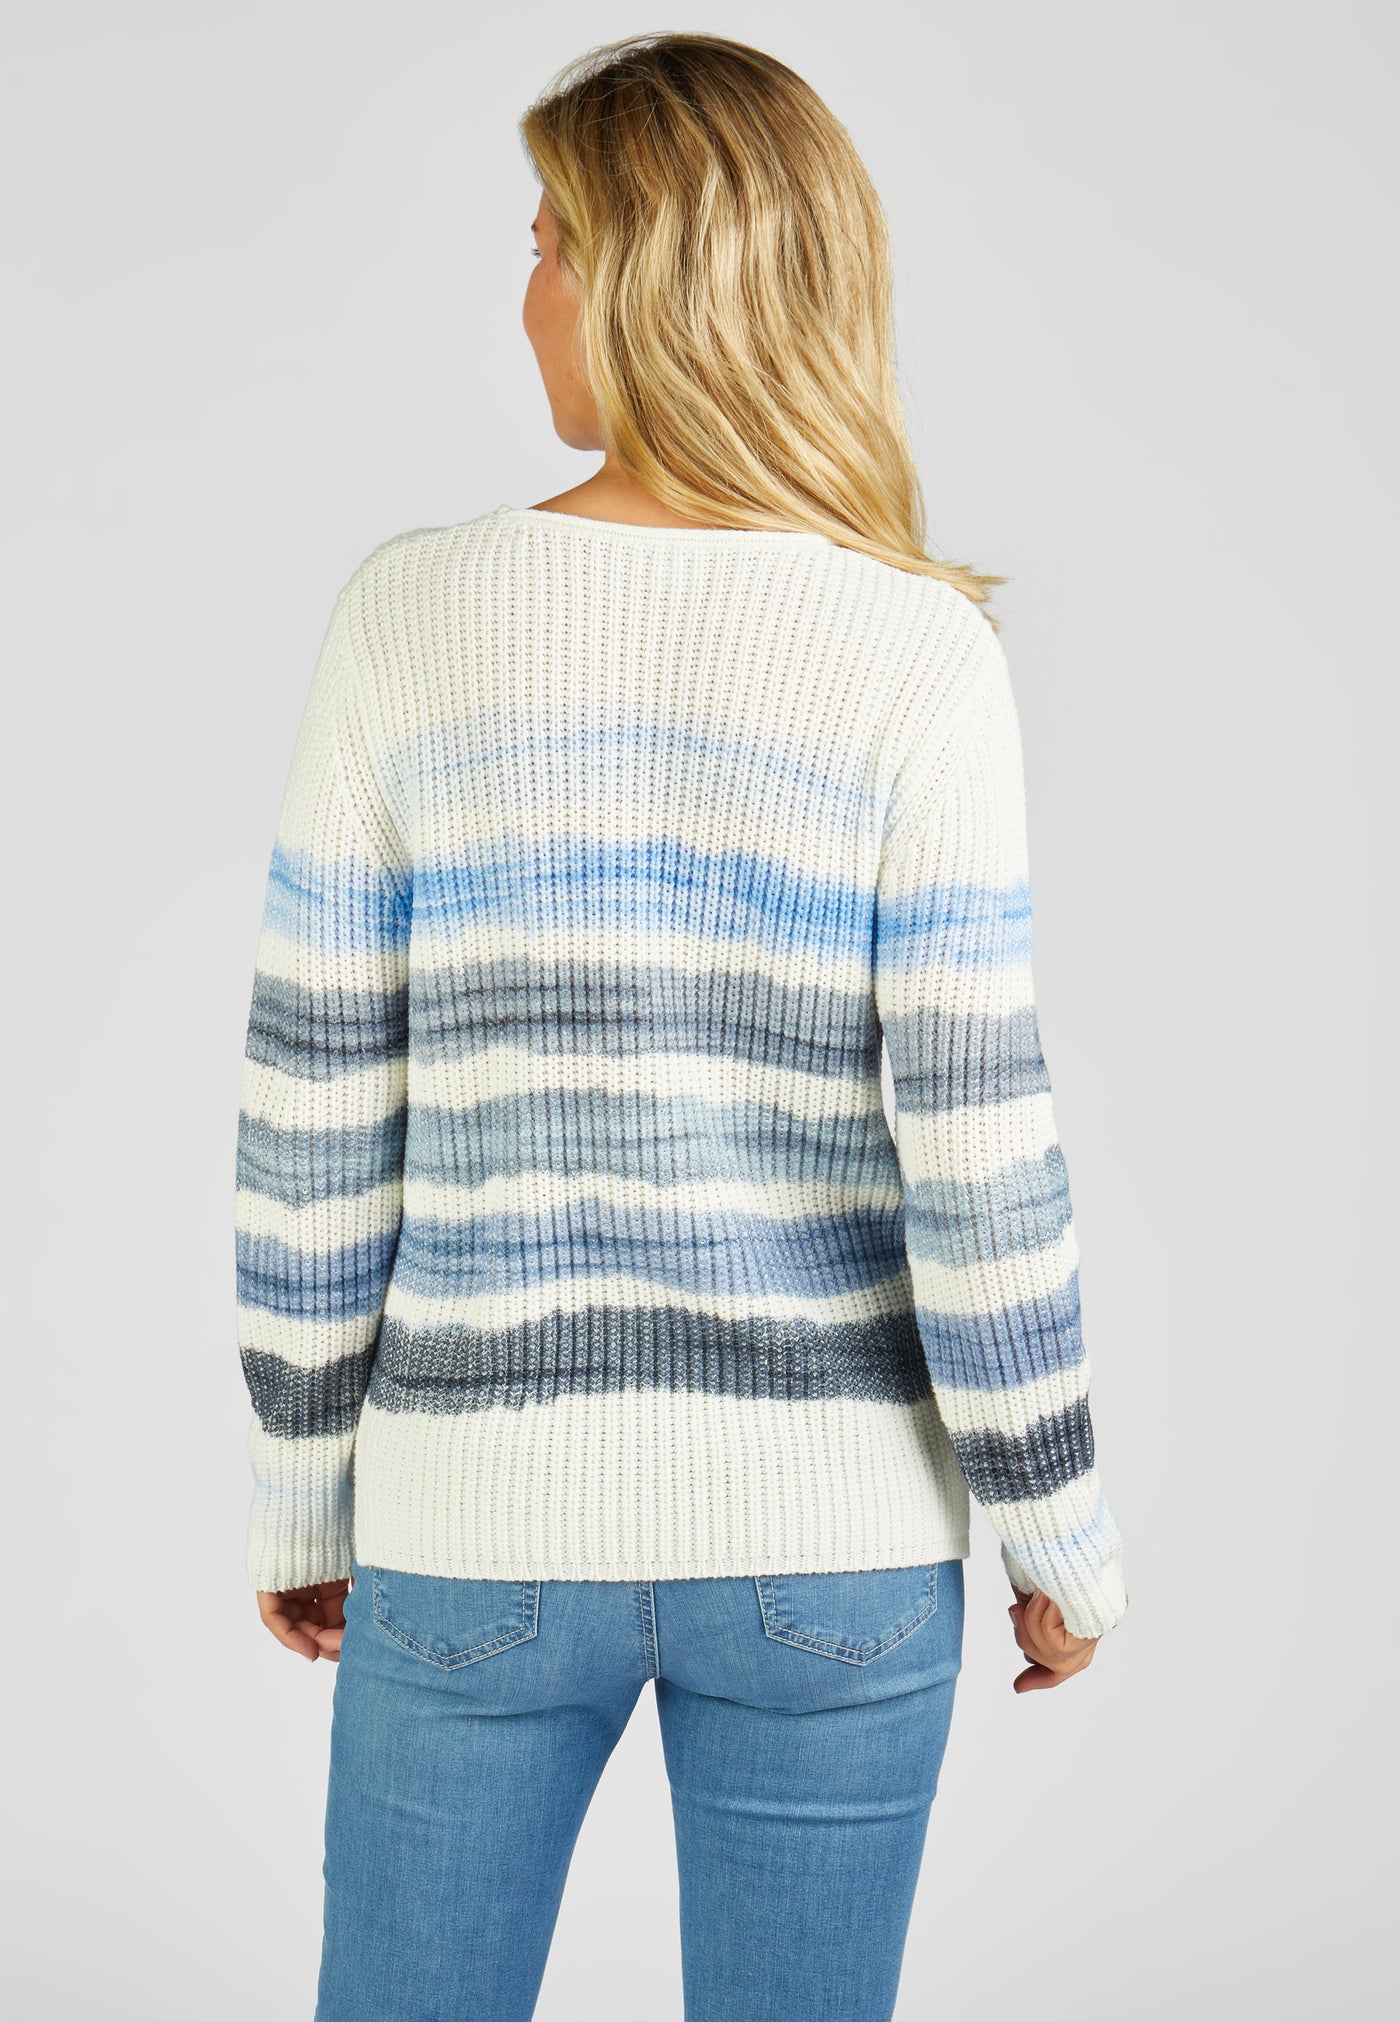 White Soft Knit Jumper Striped with Shades of Blue